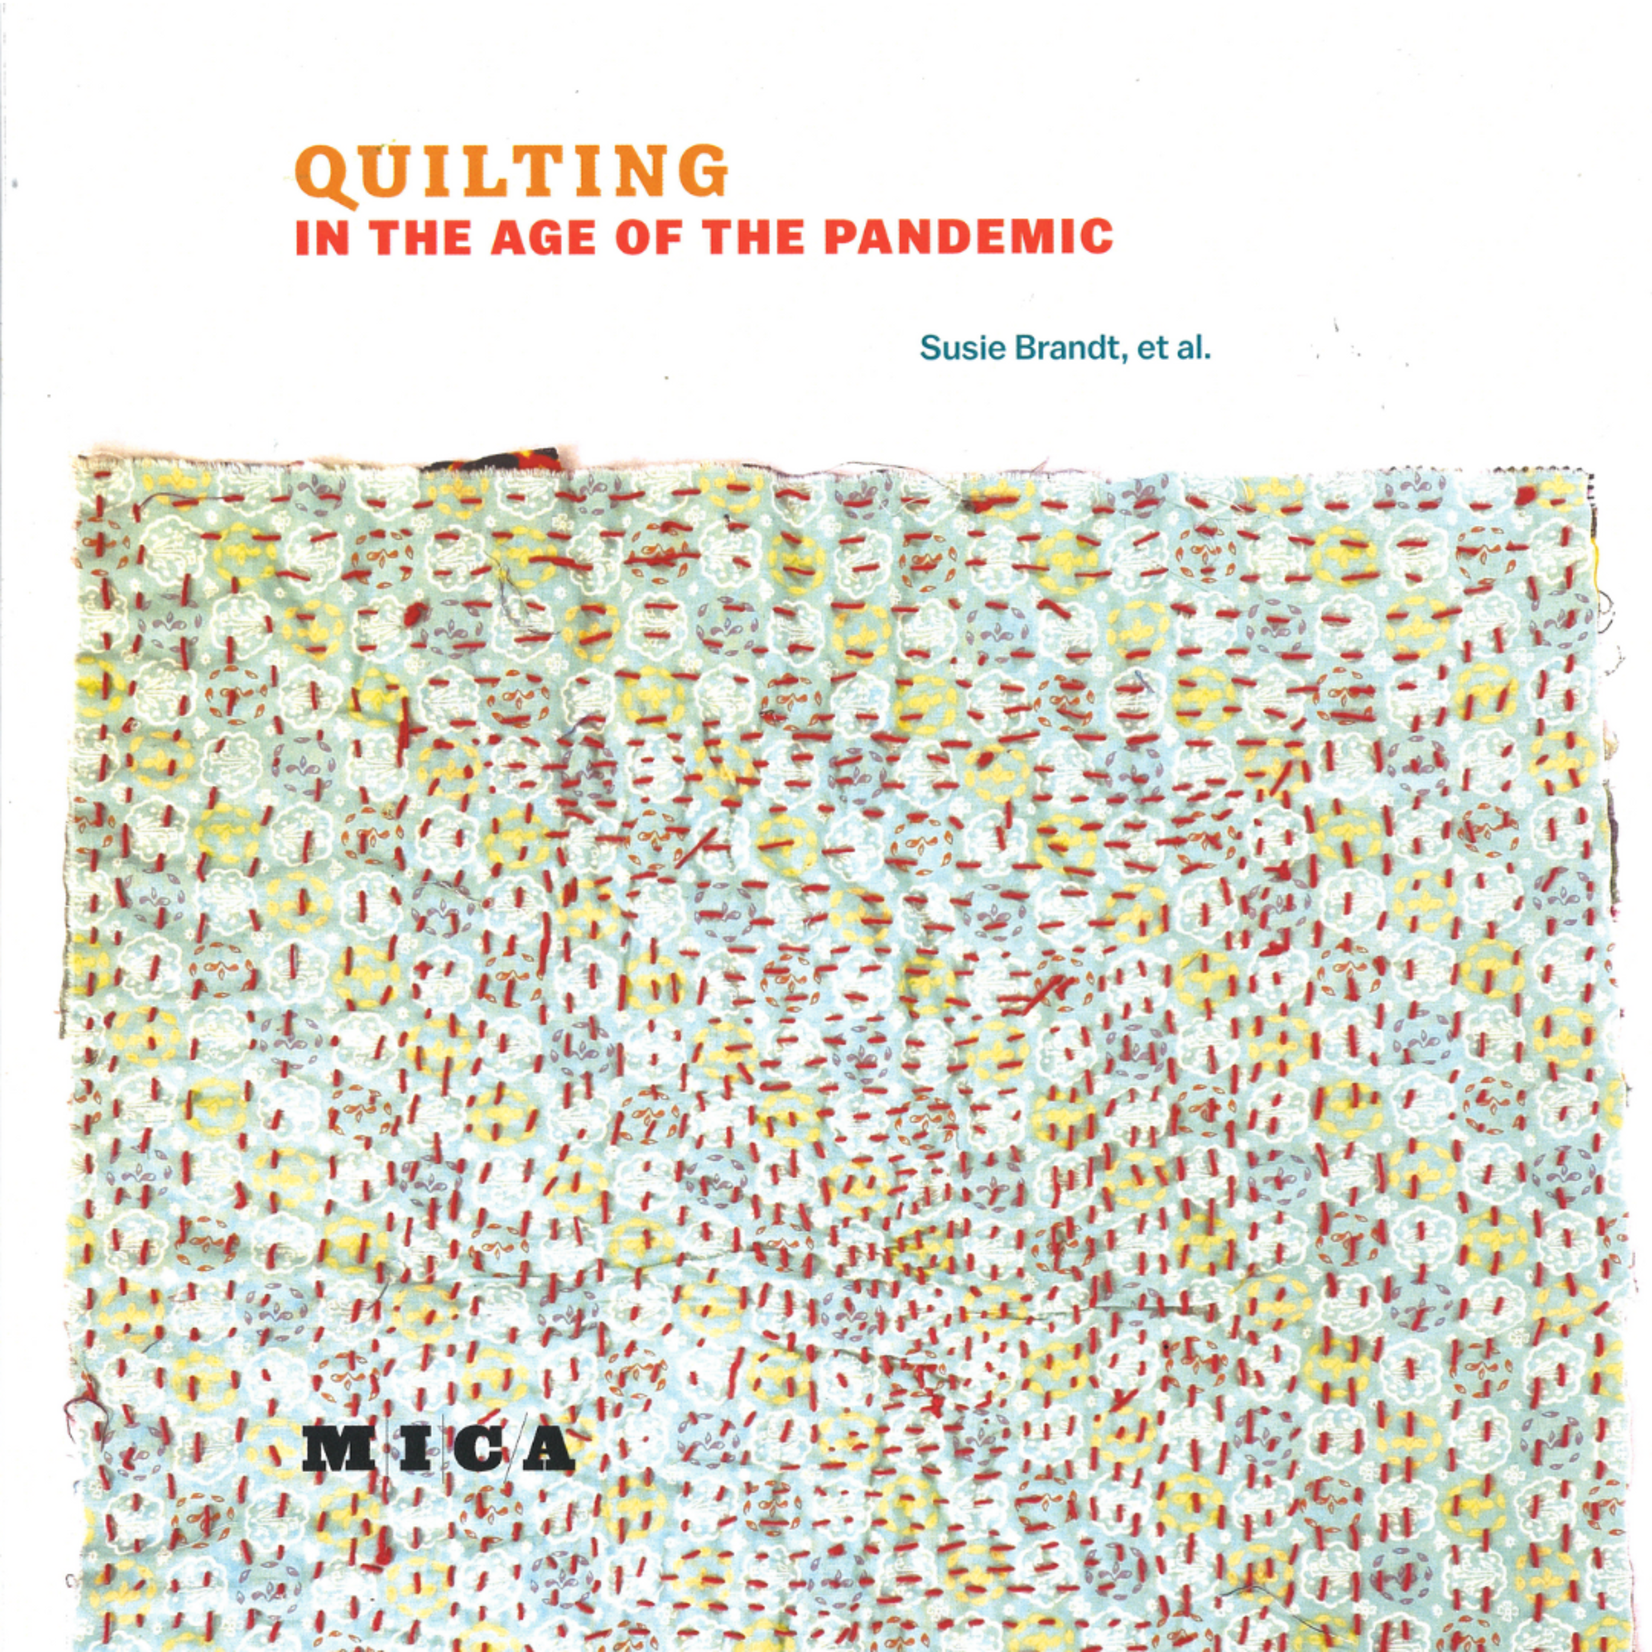 Quilting in the Age of the Pandemic